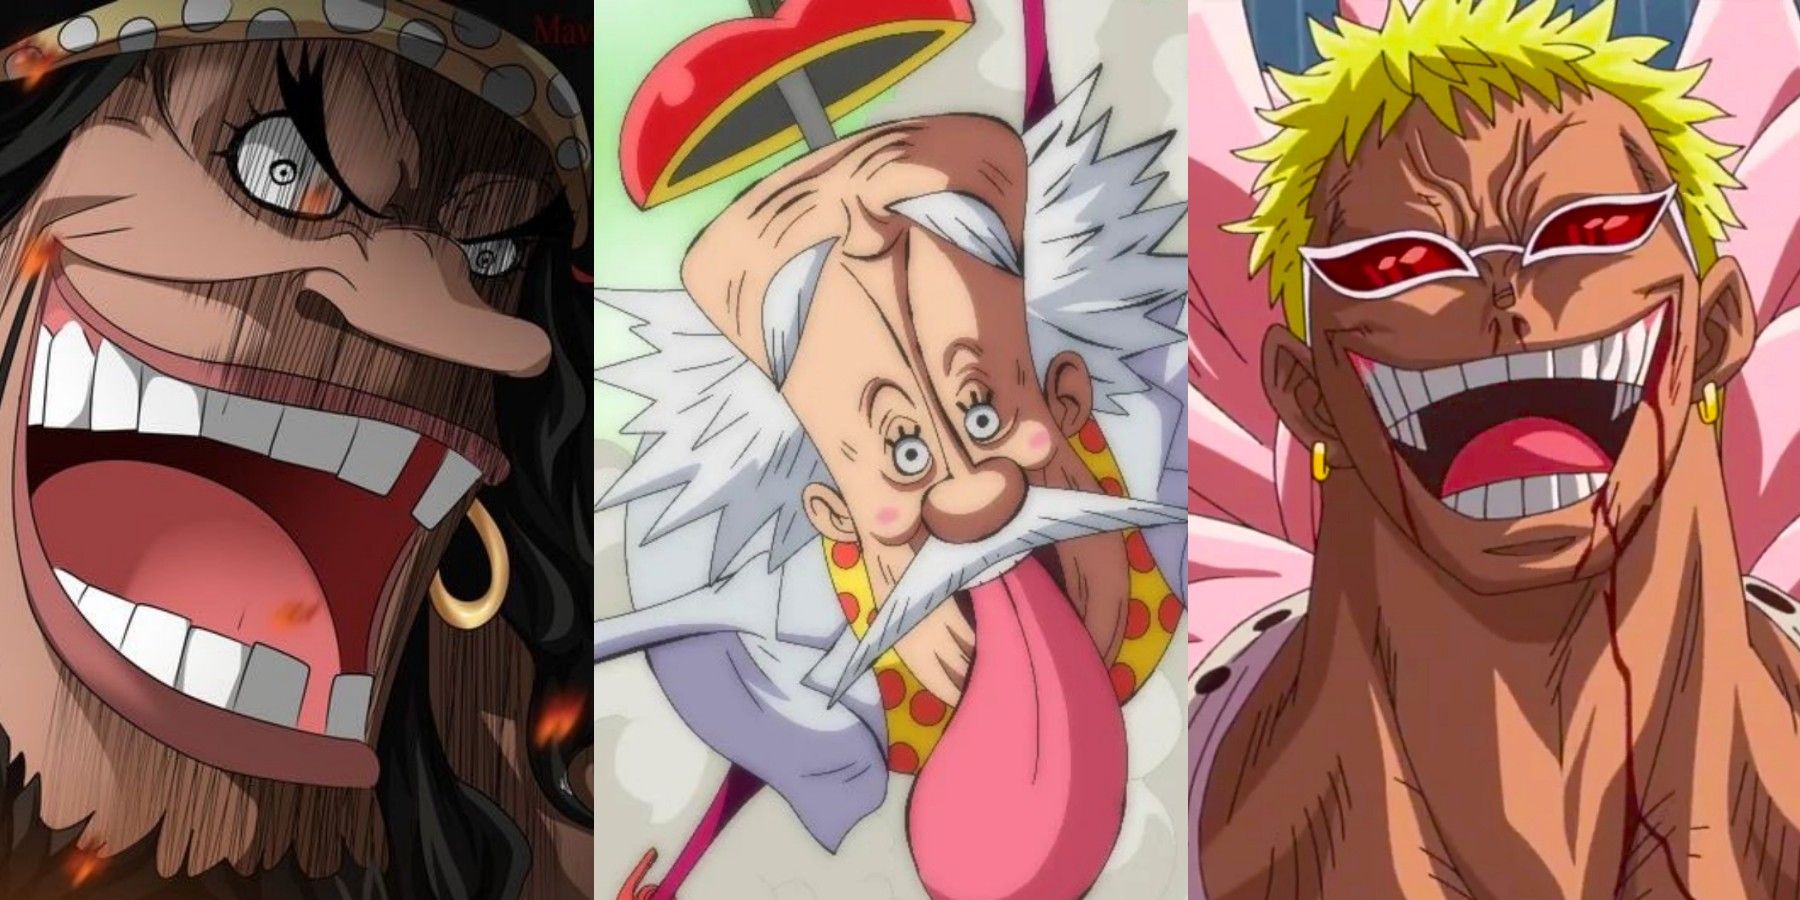 Top 10 Smartest Anime Characters 2023 - (Based on IQ) - News